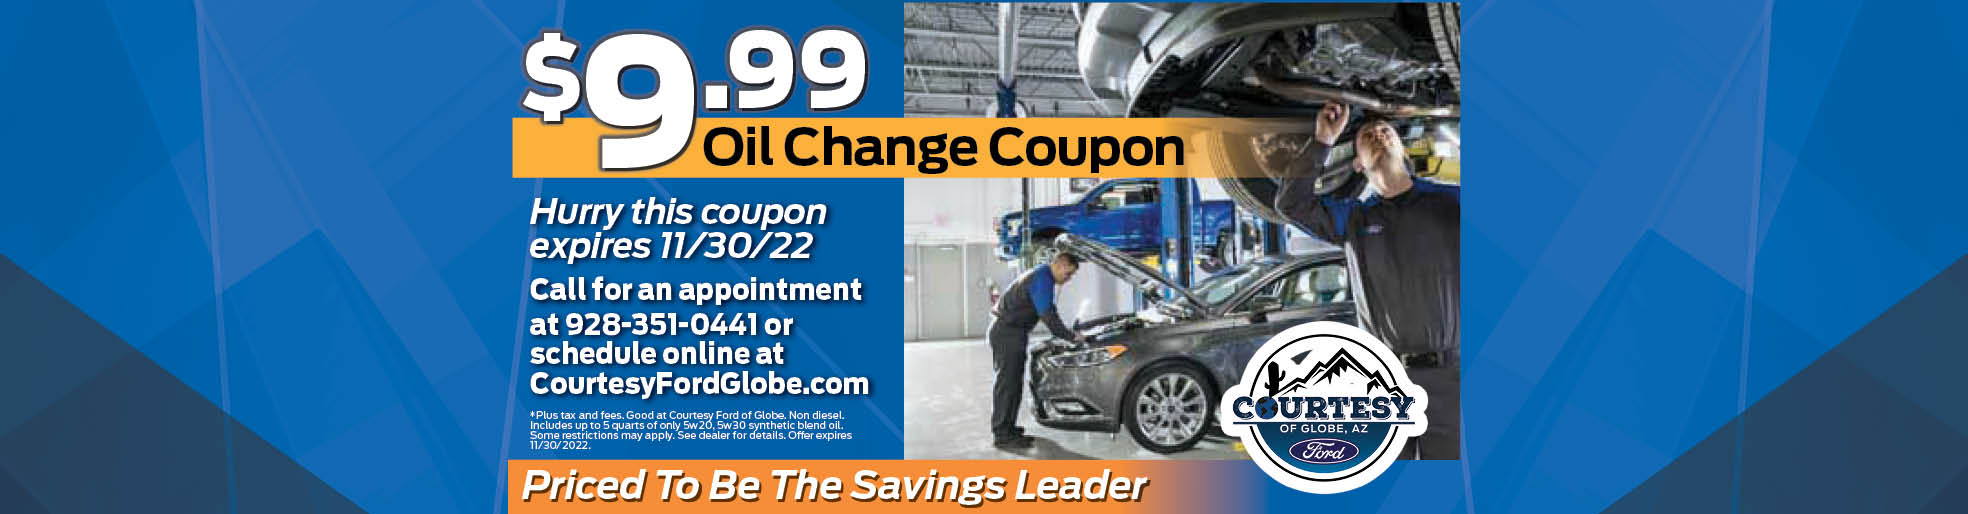 $9.99 oil change coupon, call 928-351-0441 or schedule online on this website! Expires 11/30/22.